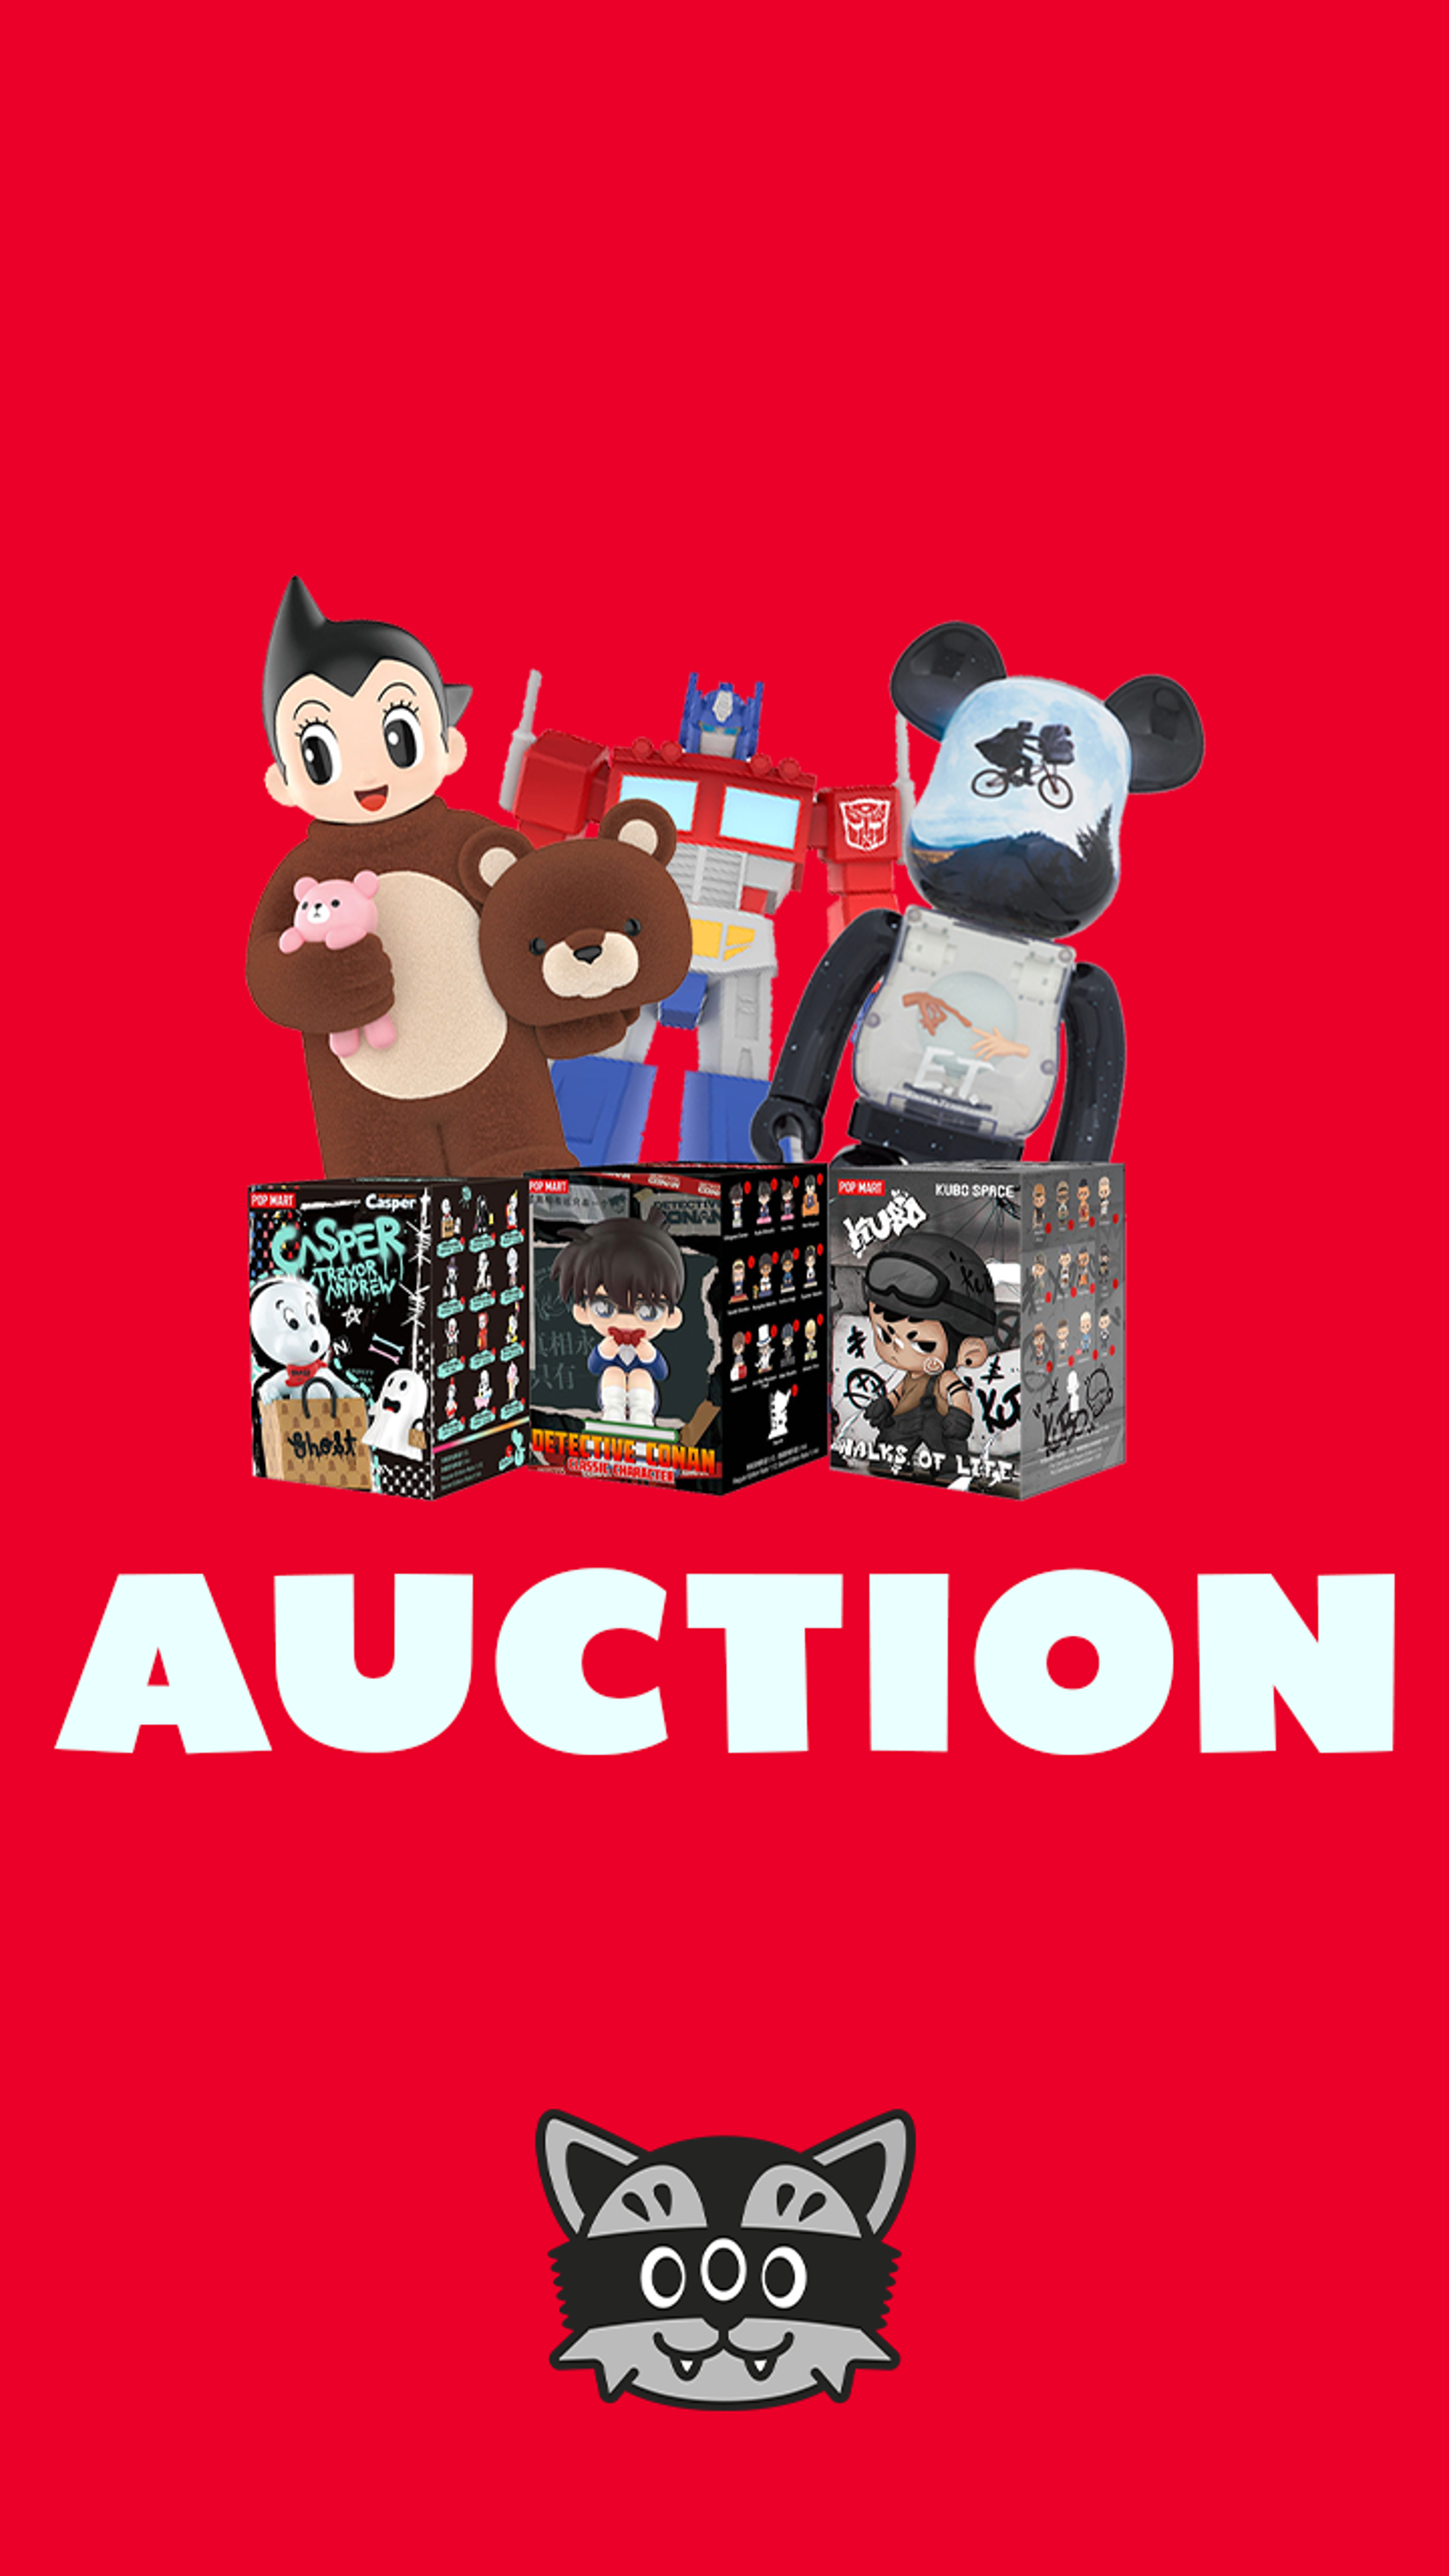 Preview image for the show titled "Mindzai Auction - May 21" at Today @ 5:00 PM